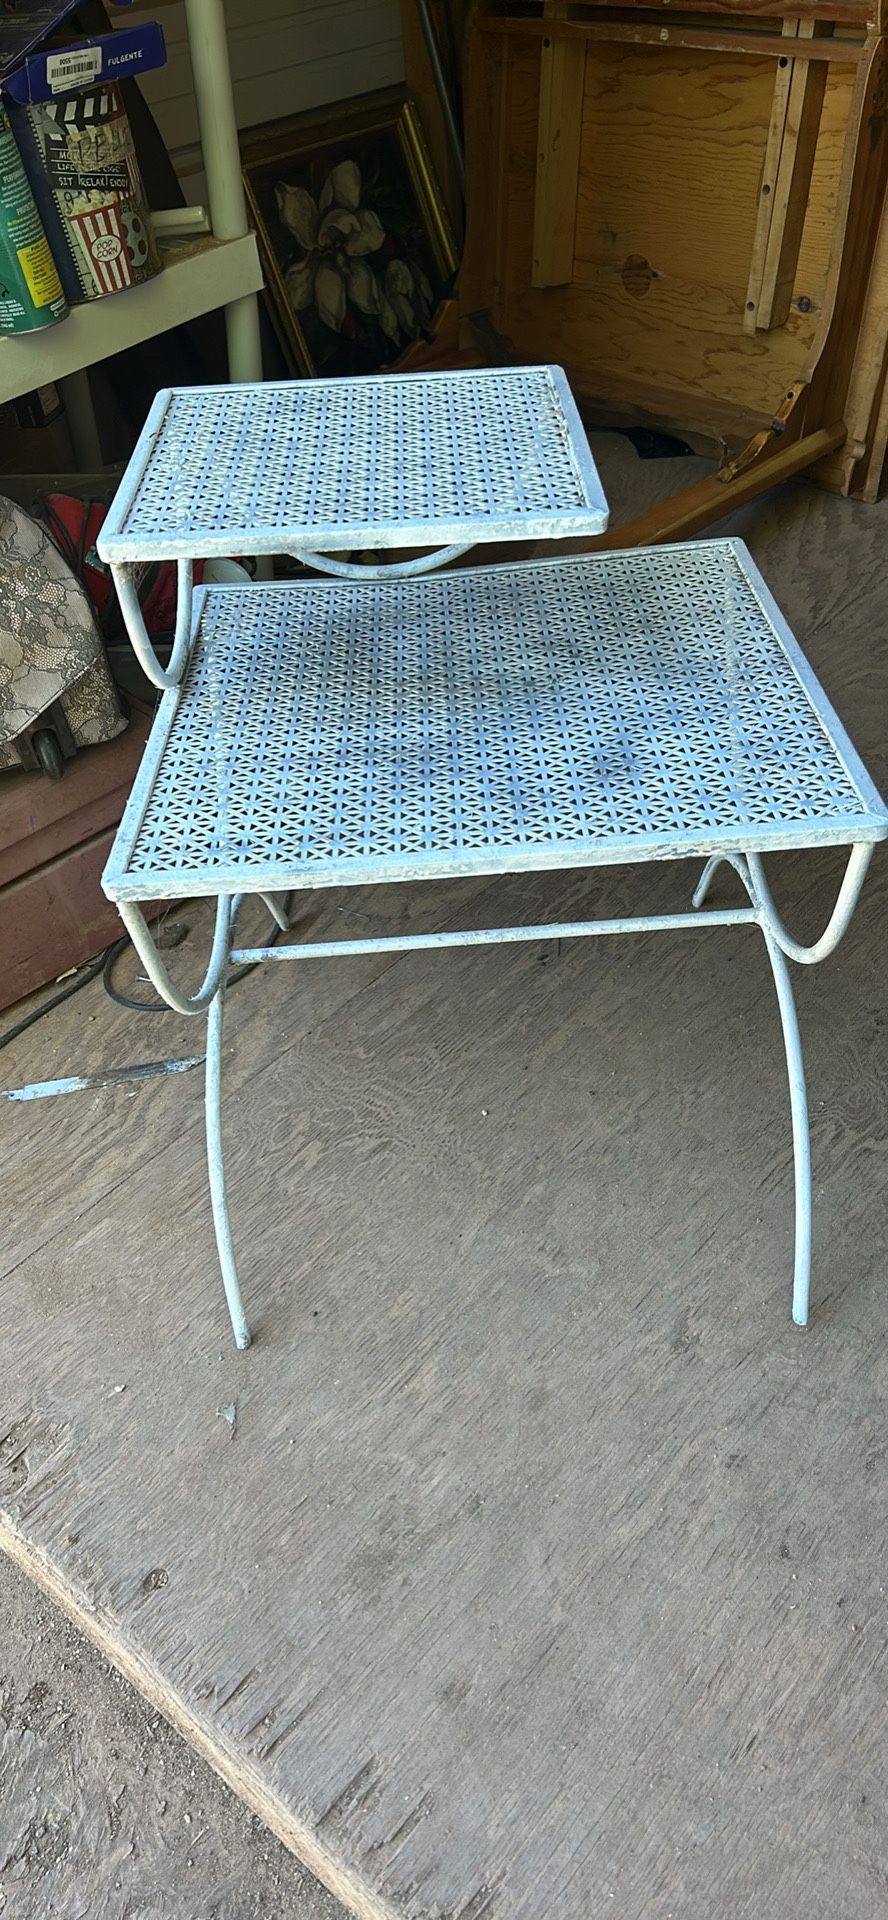  metal table its 22 inches tall 19 inches wide and 18 inches deep